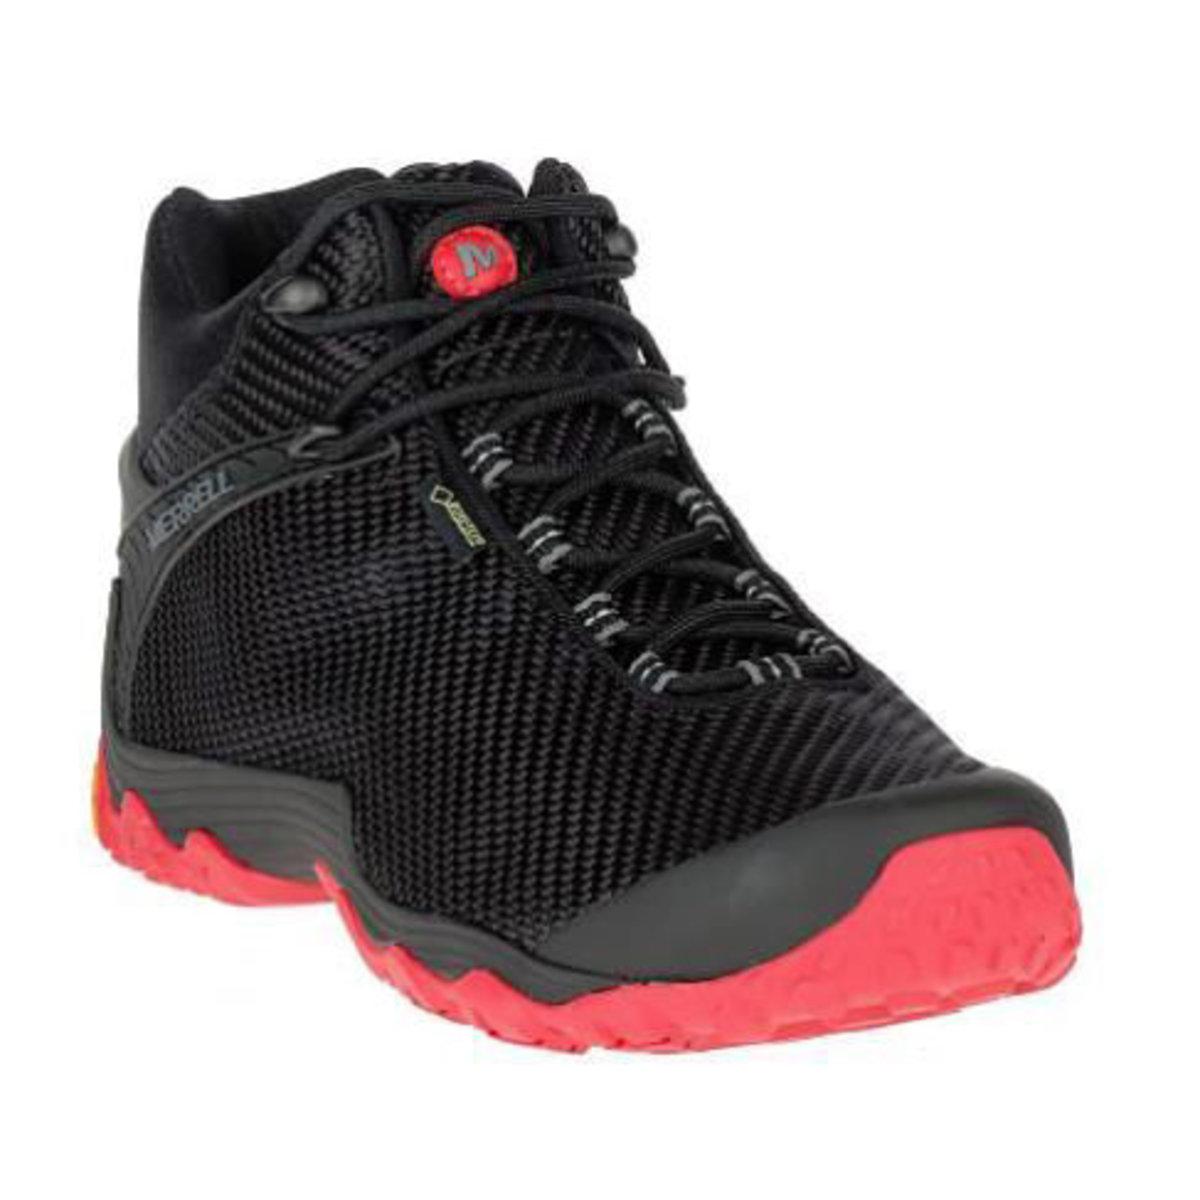 Merrell Lace Chameleon 7 Storm Mid Gore-tex® in Black/Red (Black 